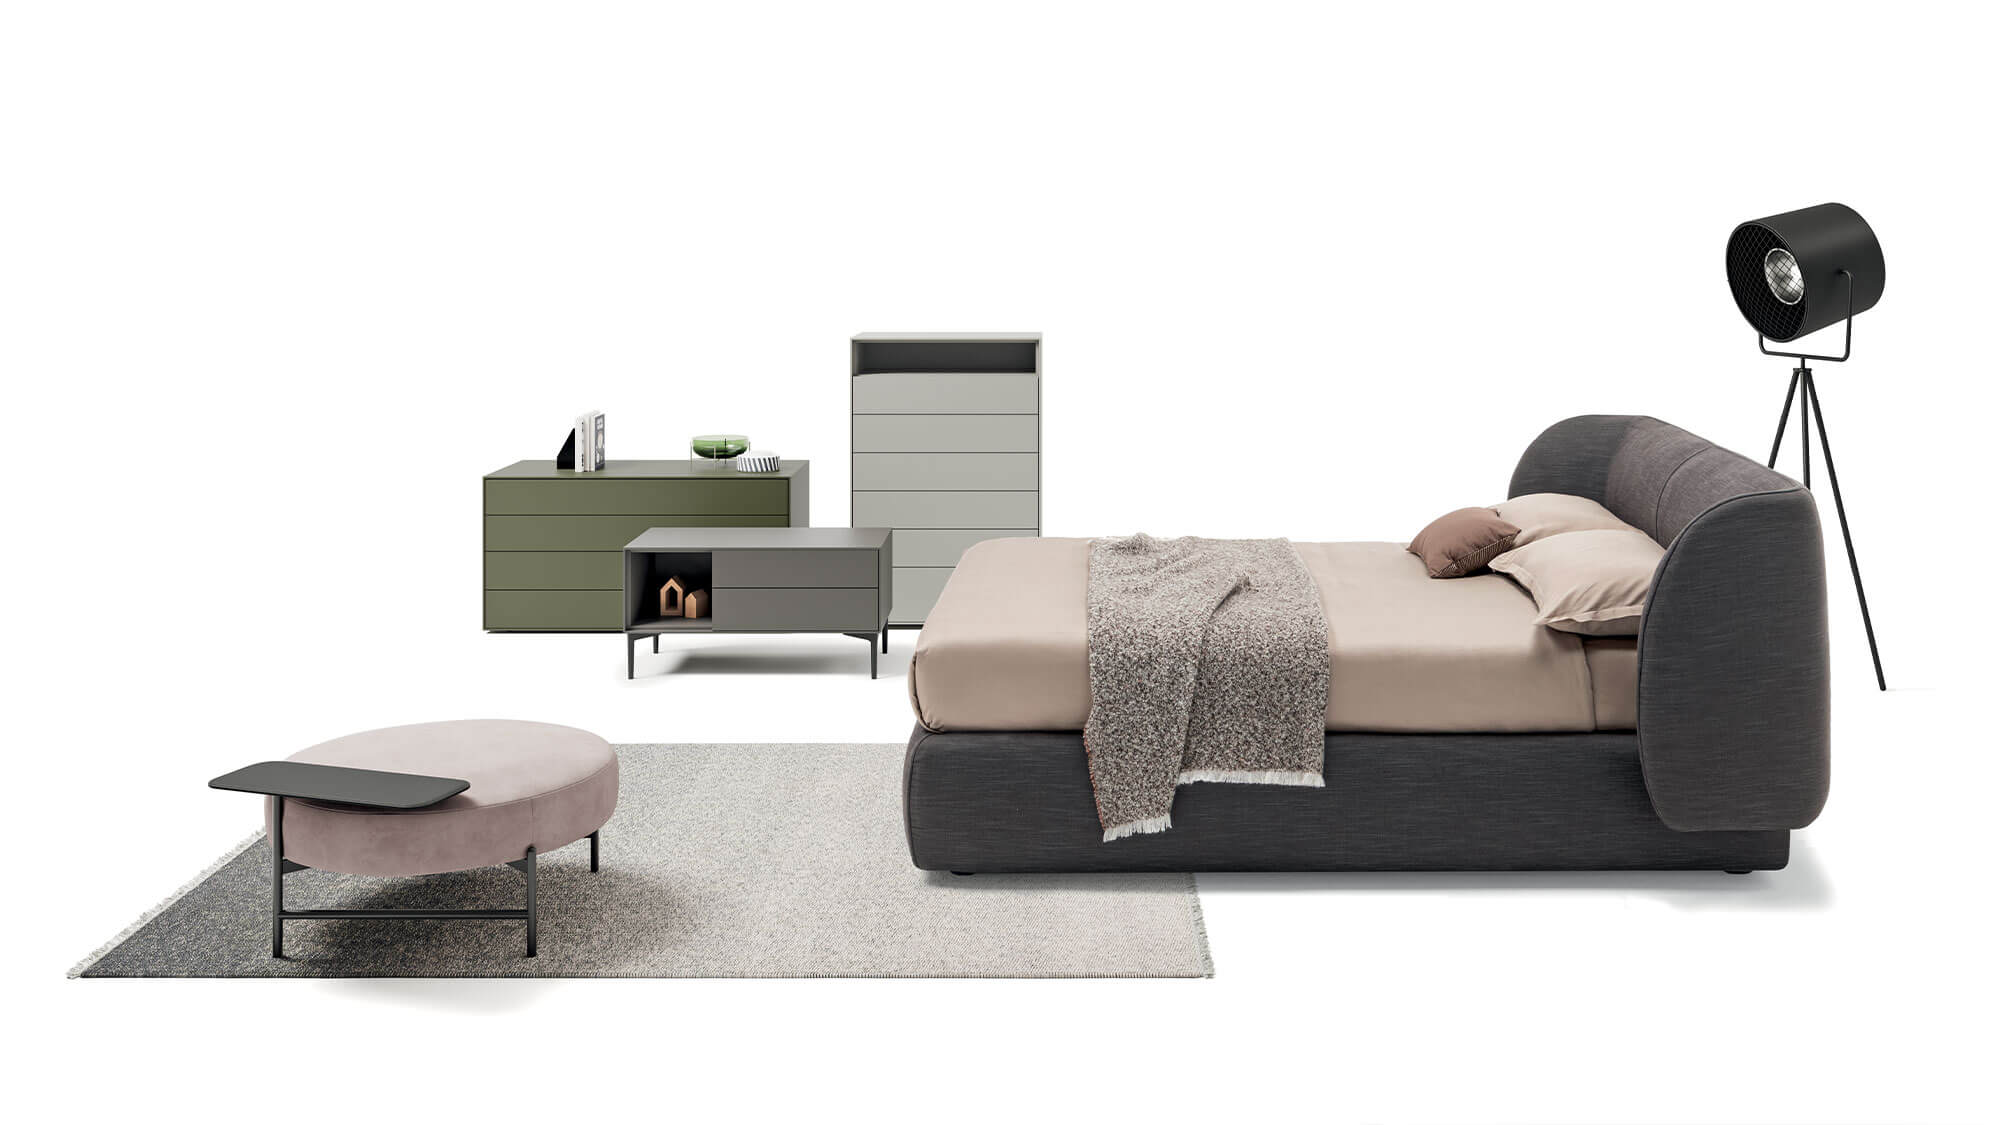 Bedroom with Inemuri bed, Kompos night storage units and Supernova pouf | Dallagnese